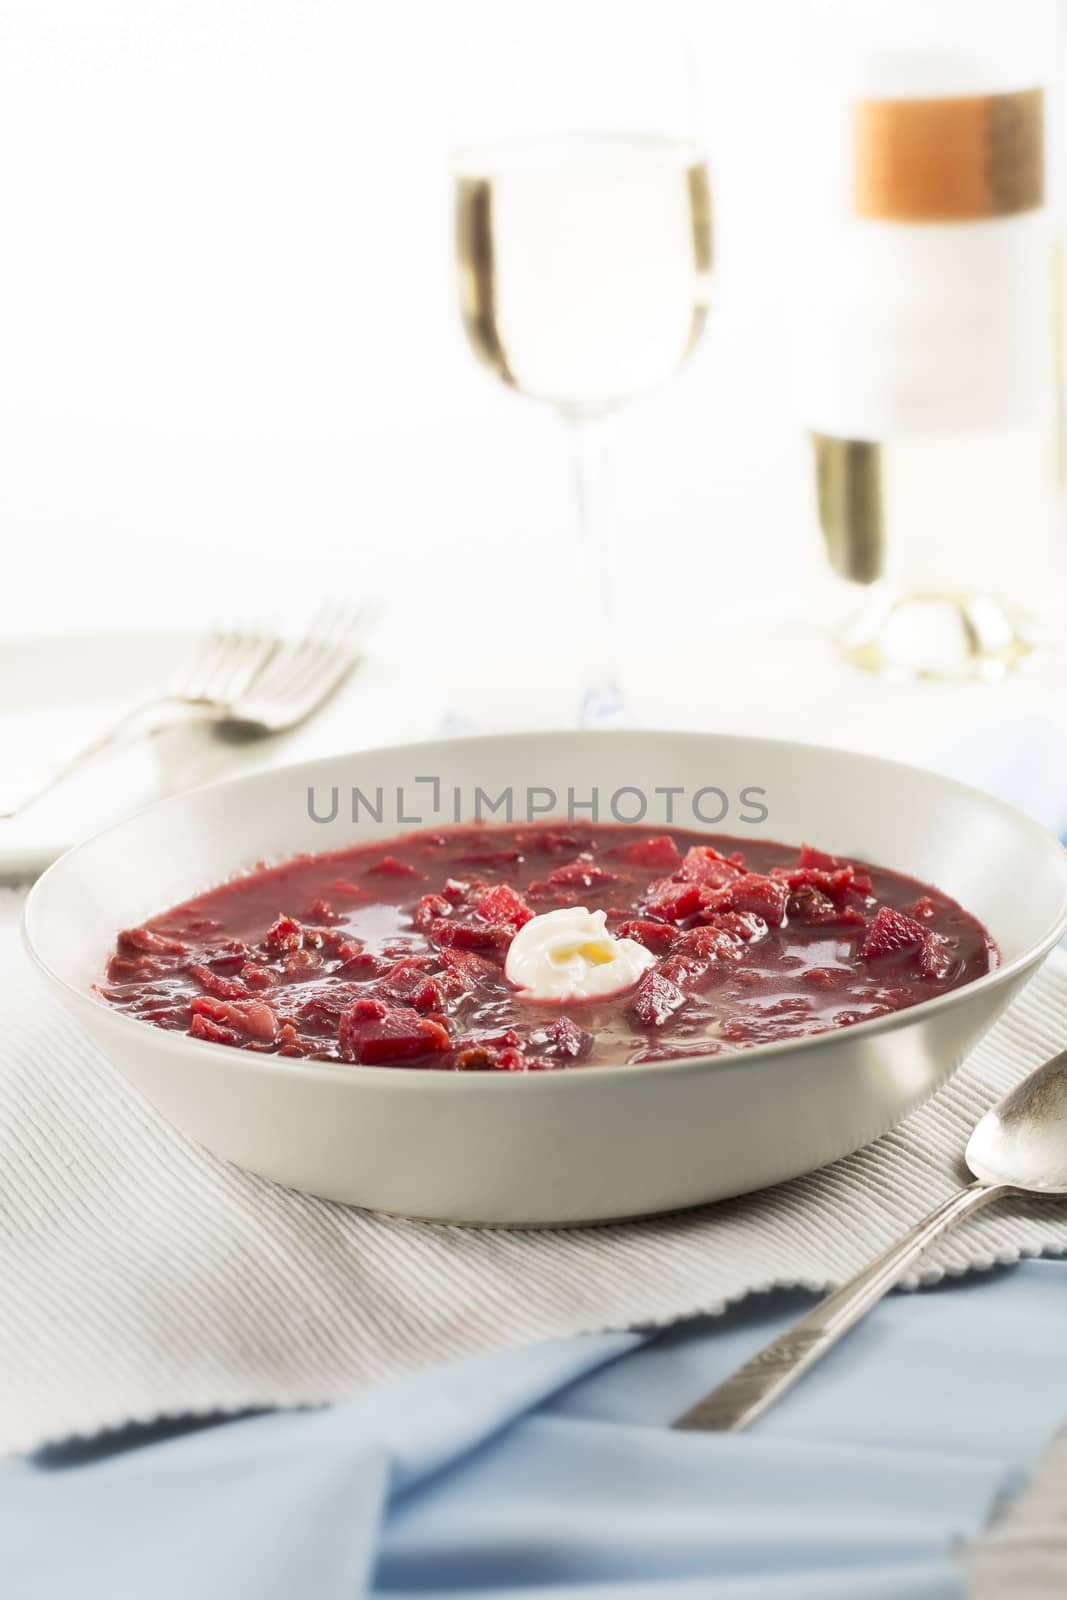 Borscht on table with wine in background, vertical orientation.